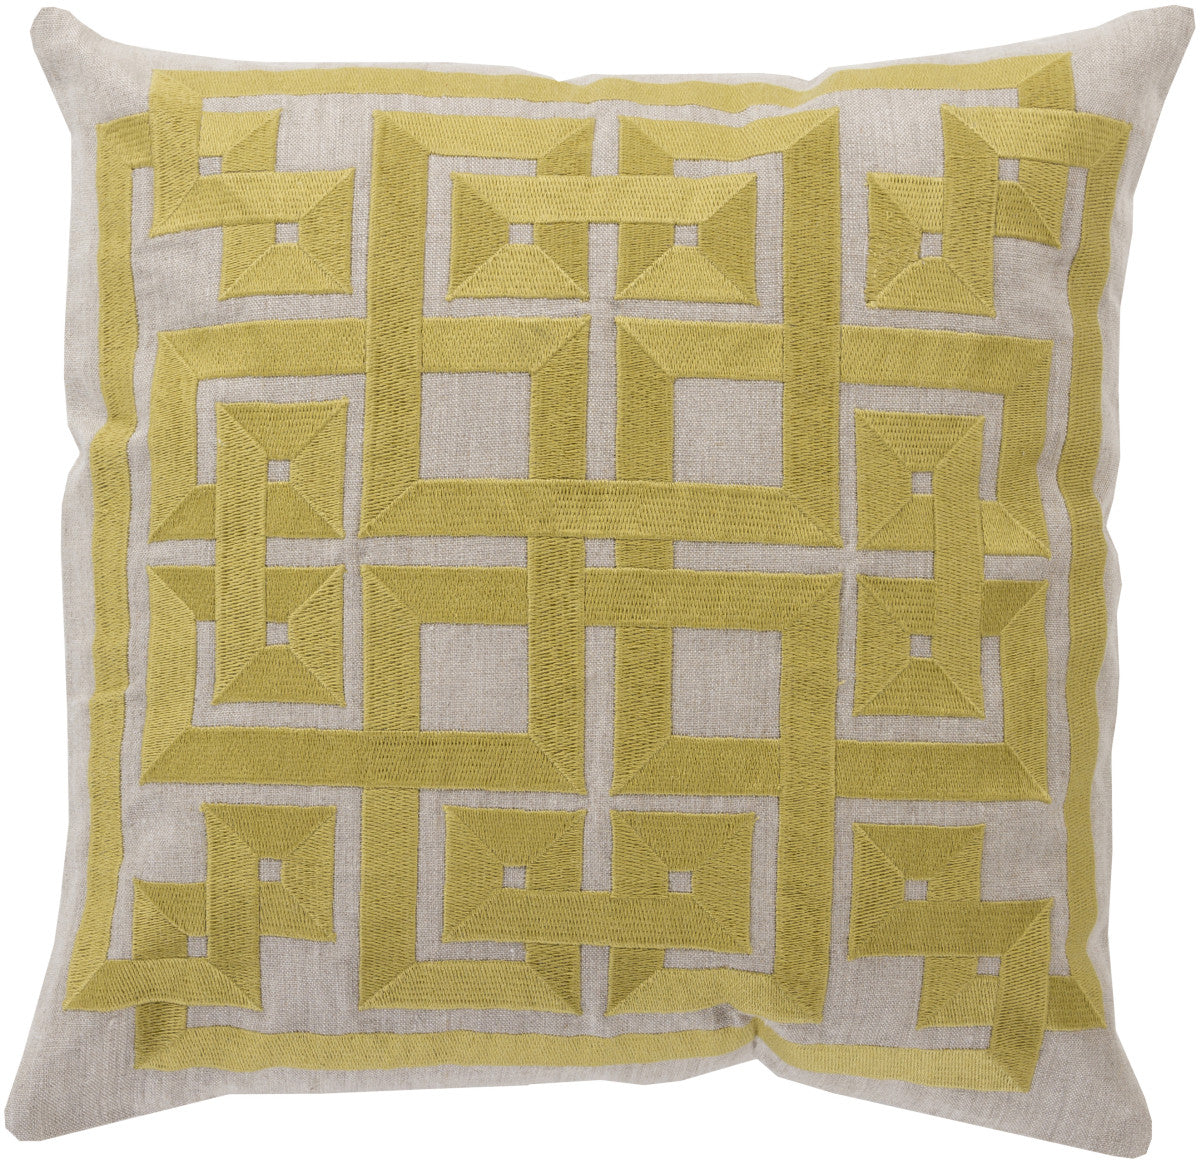 Surya Gramercy Intersected Geometrics LD-005 Pillow by Beth Lacefield